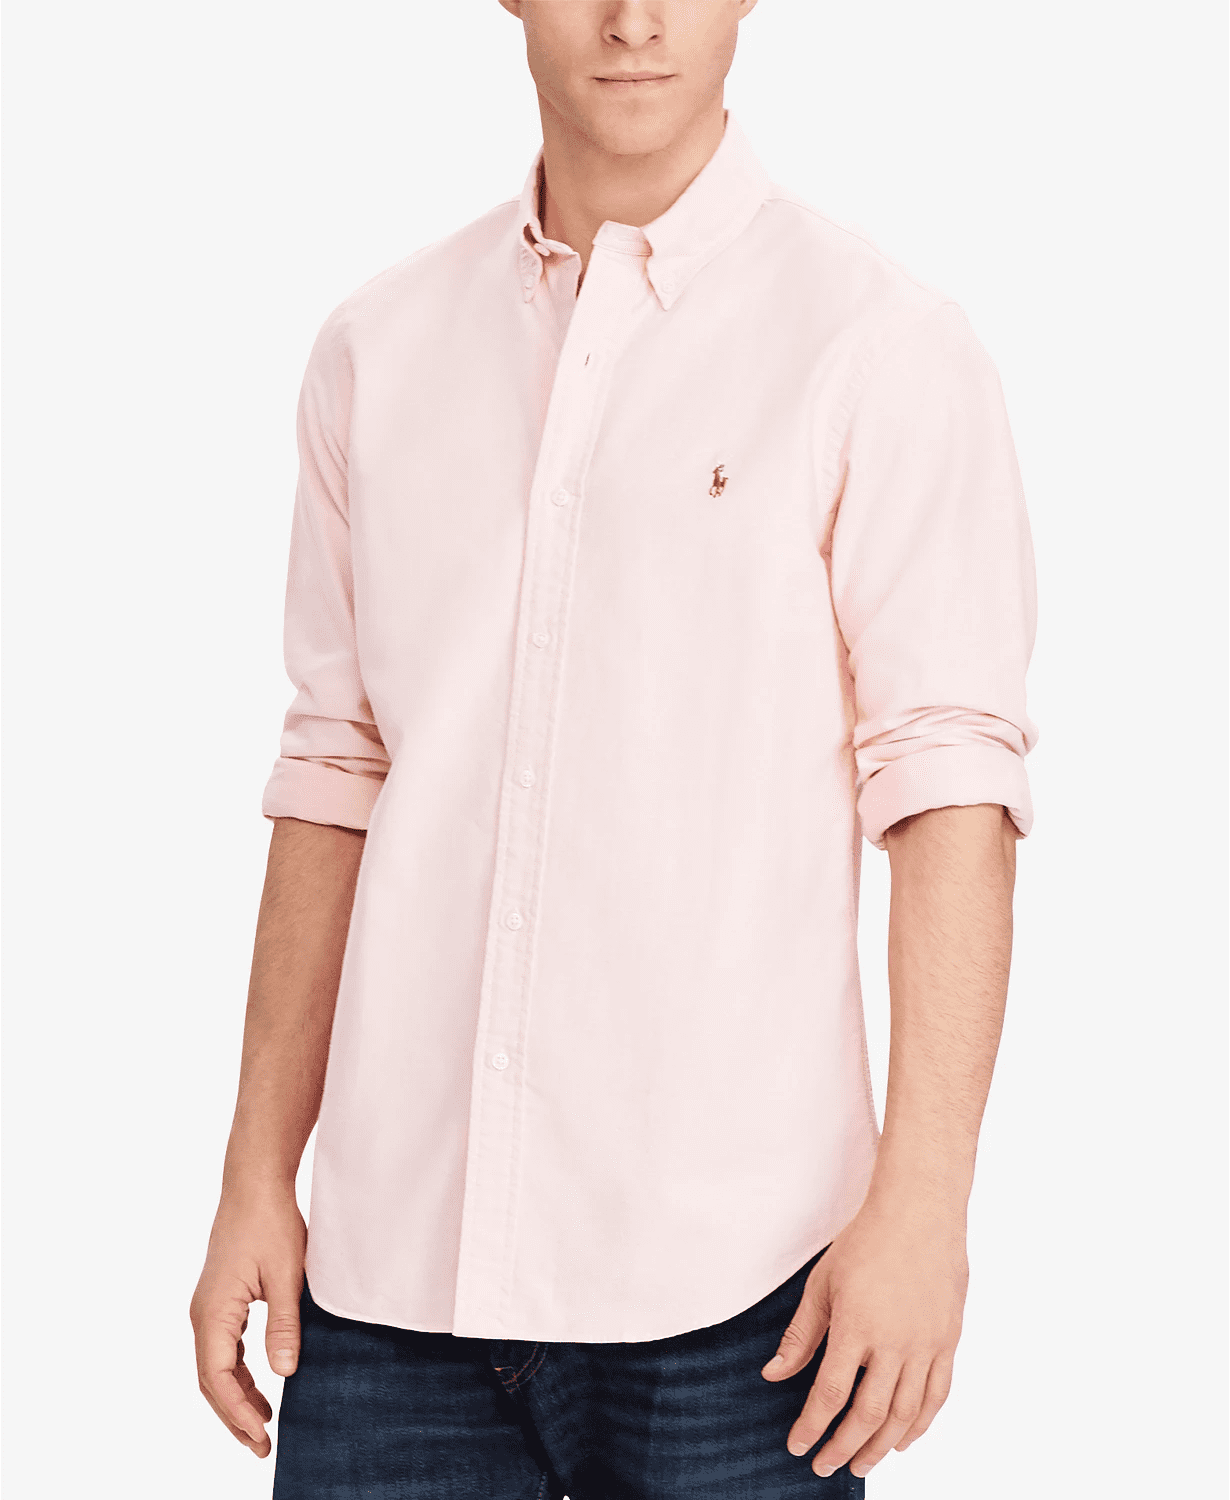 Polo Ralph Lauren PINK Classic Fit Long Sleeve Solid Oxford Shirt